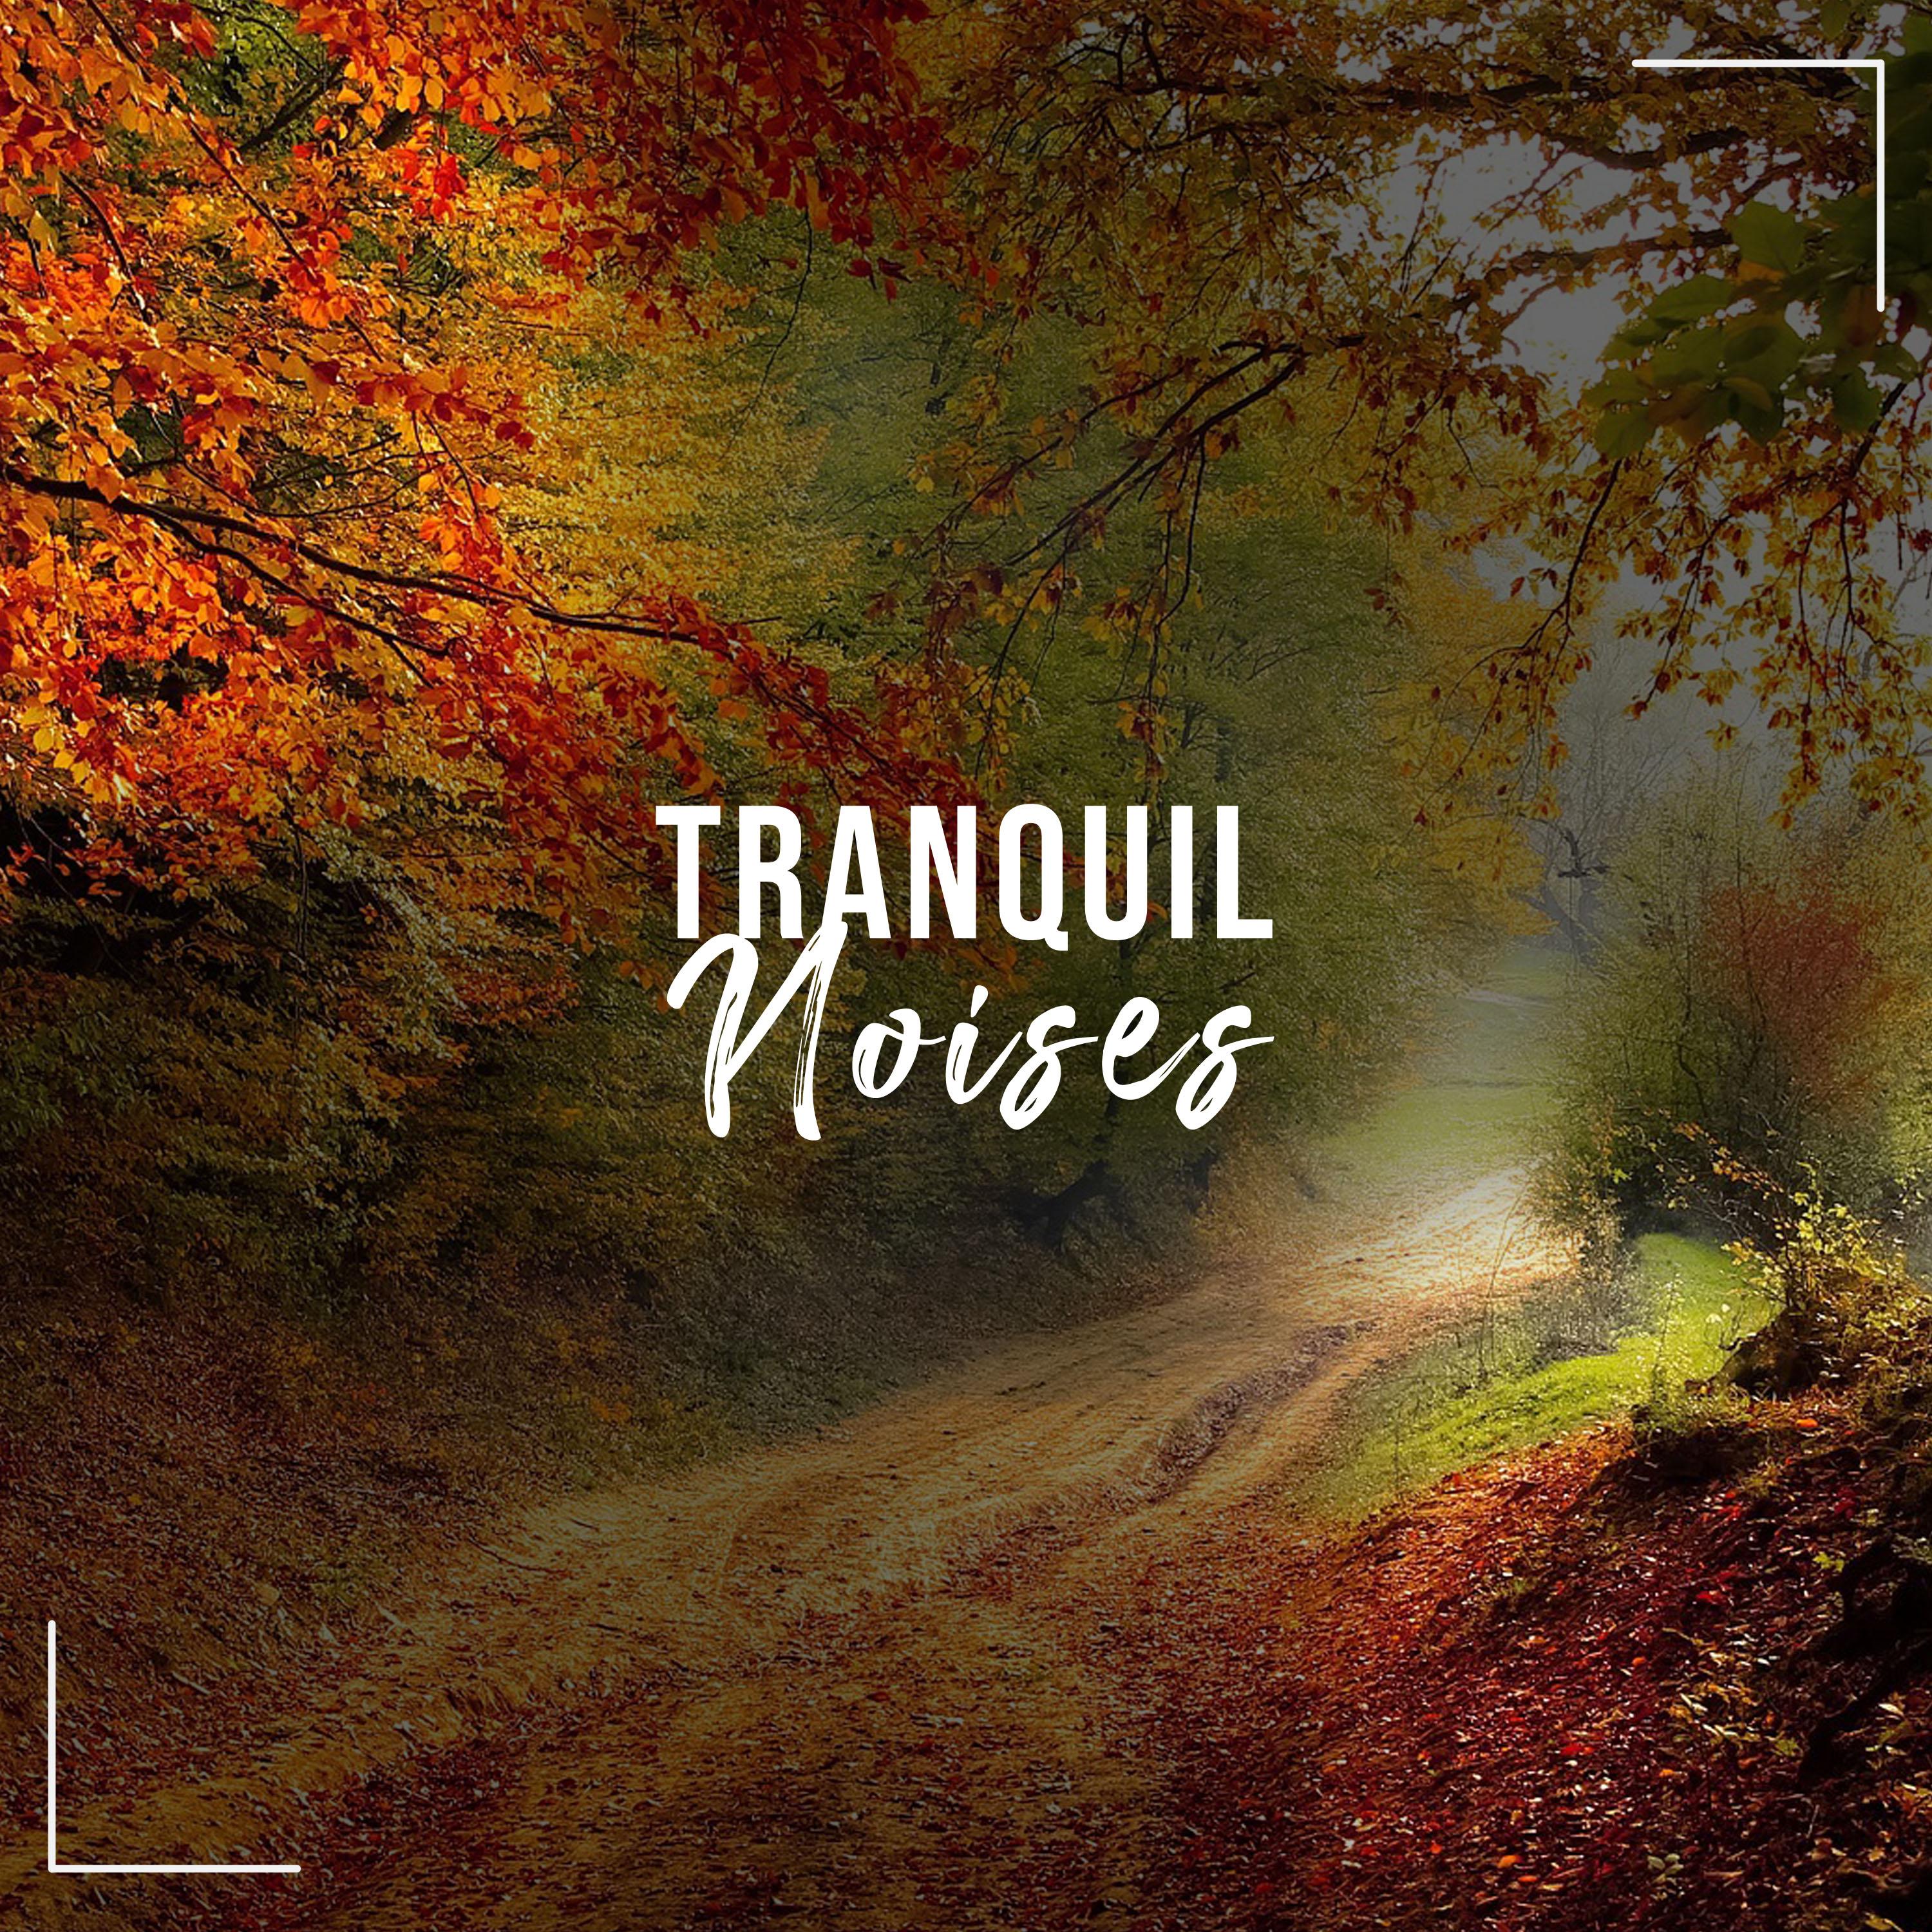 #18 Tranquil Noises to Free the Soul